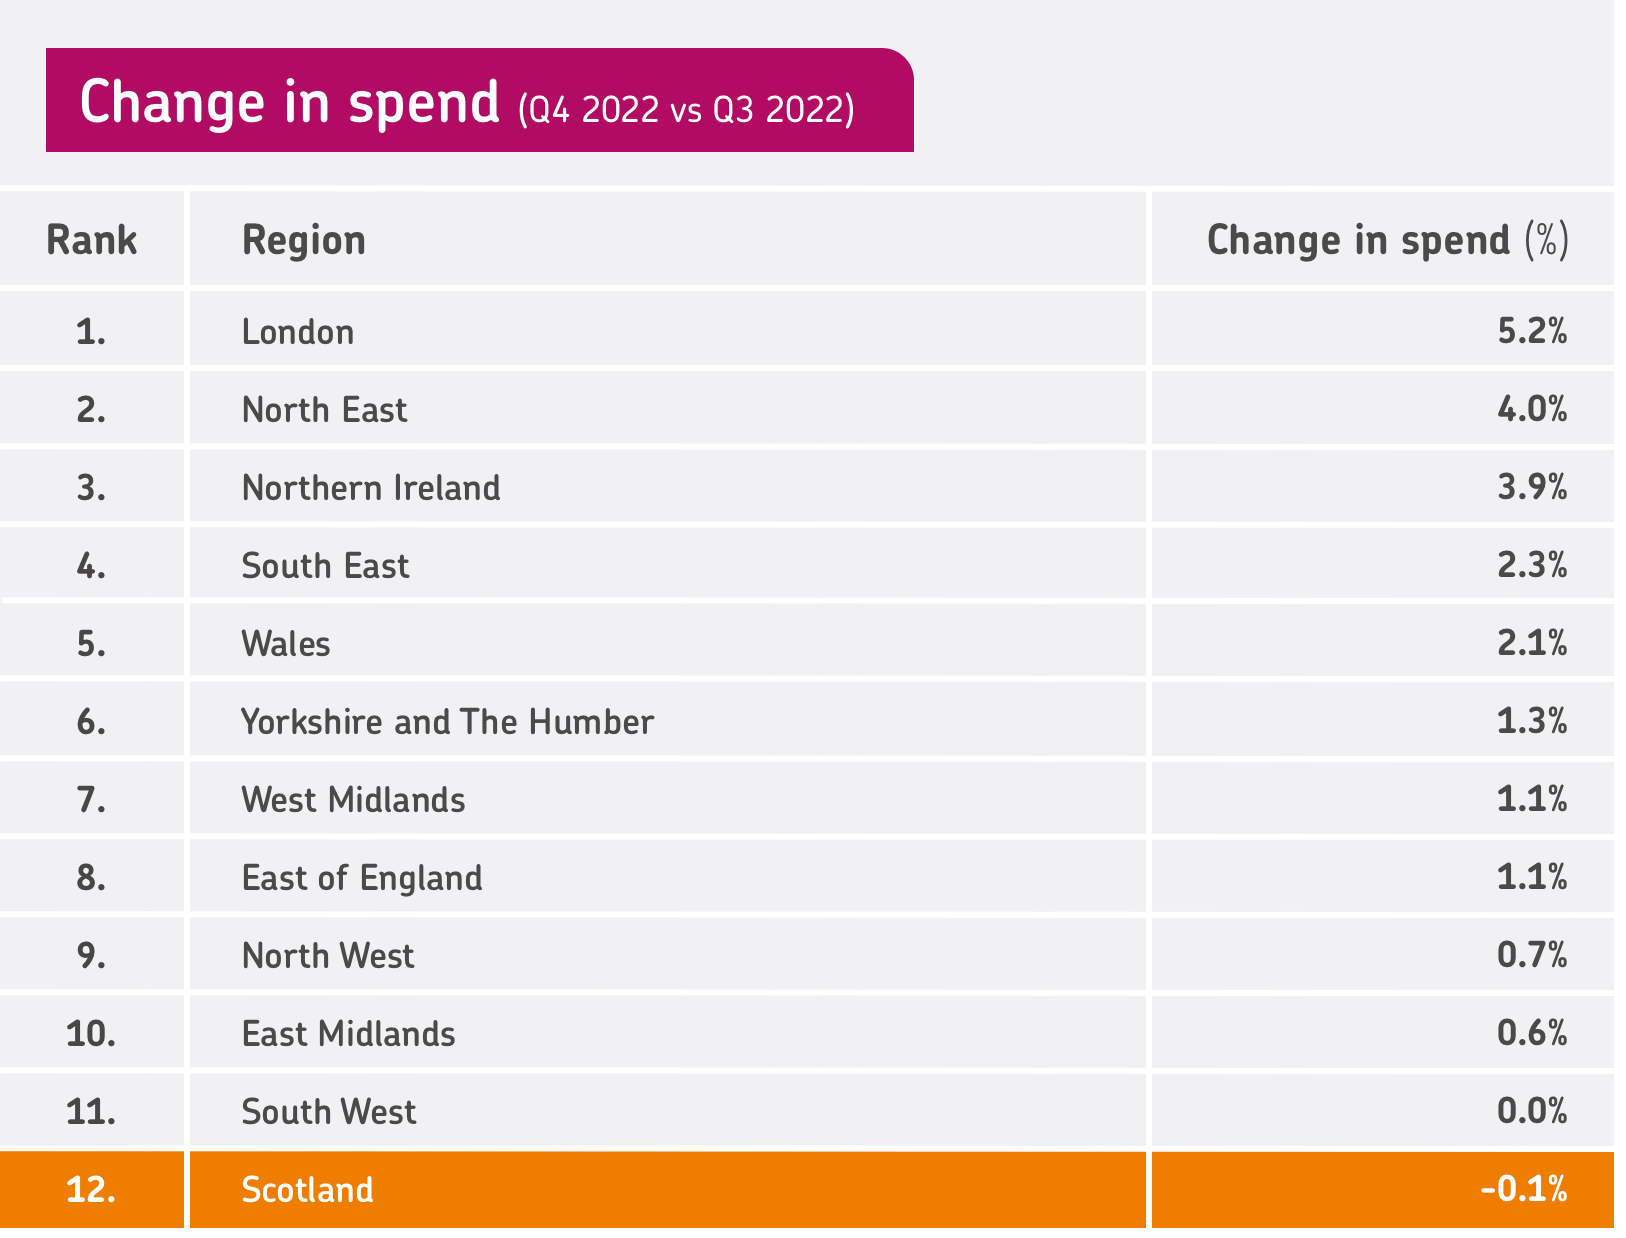 Table showing how spending changed for each UK region in Q4 2022 vs Q3, with Scotland highlighted at the bottom